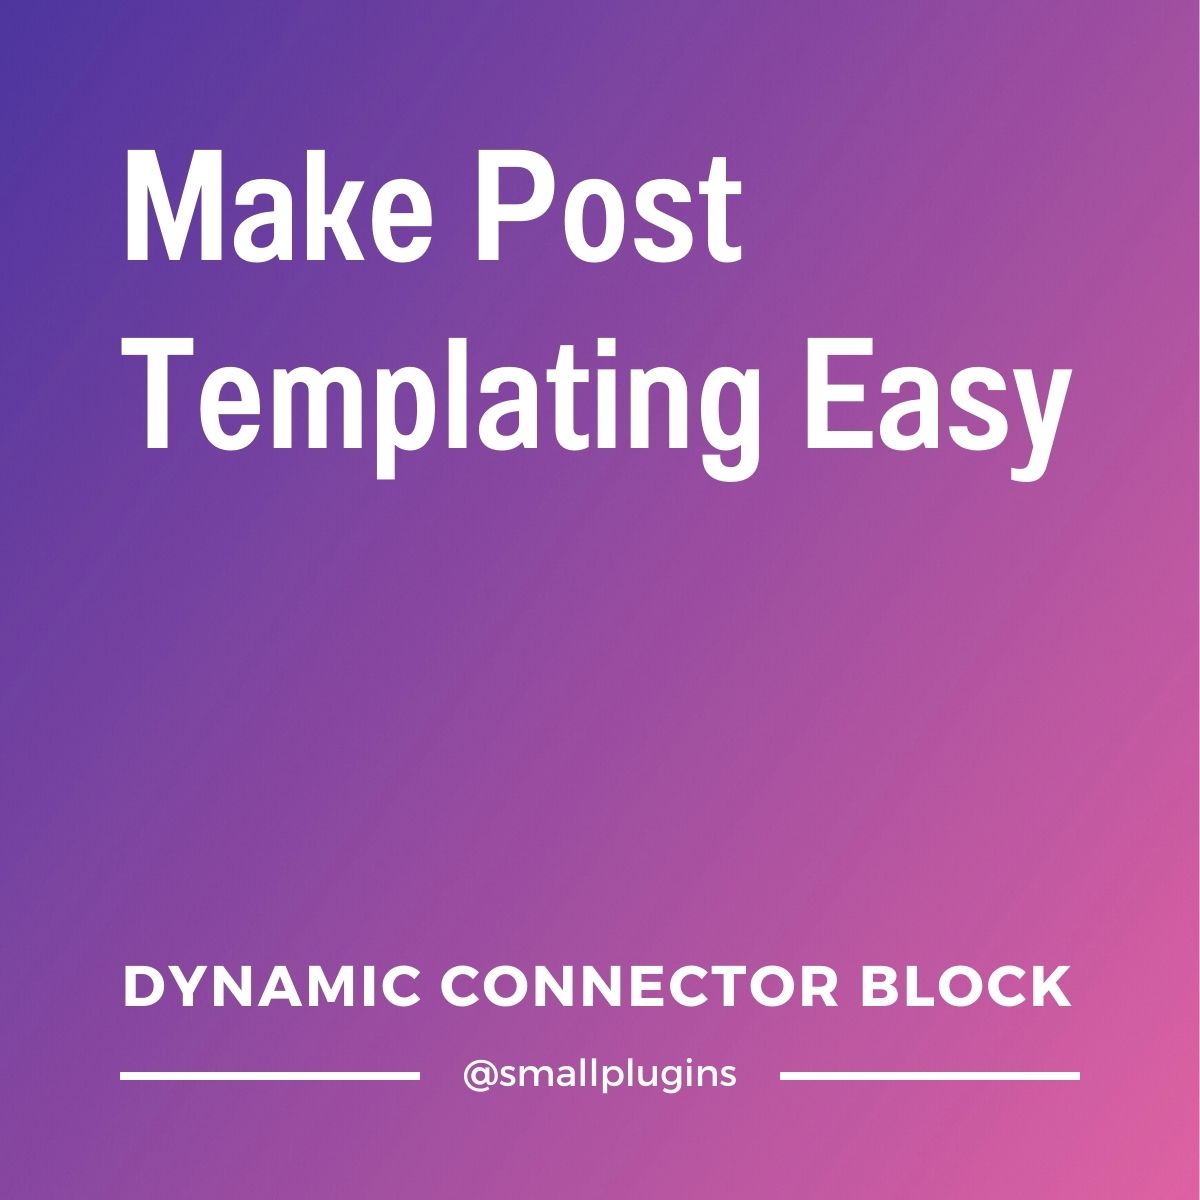 Dynamic Connector Block: make post templating easy